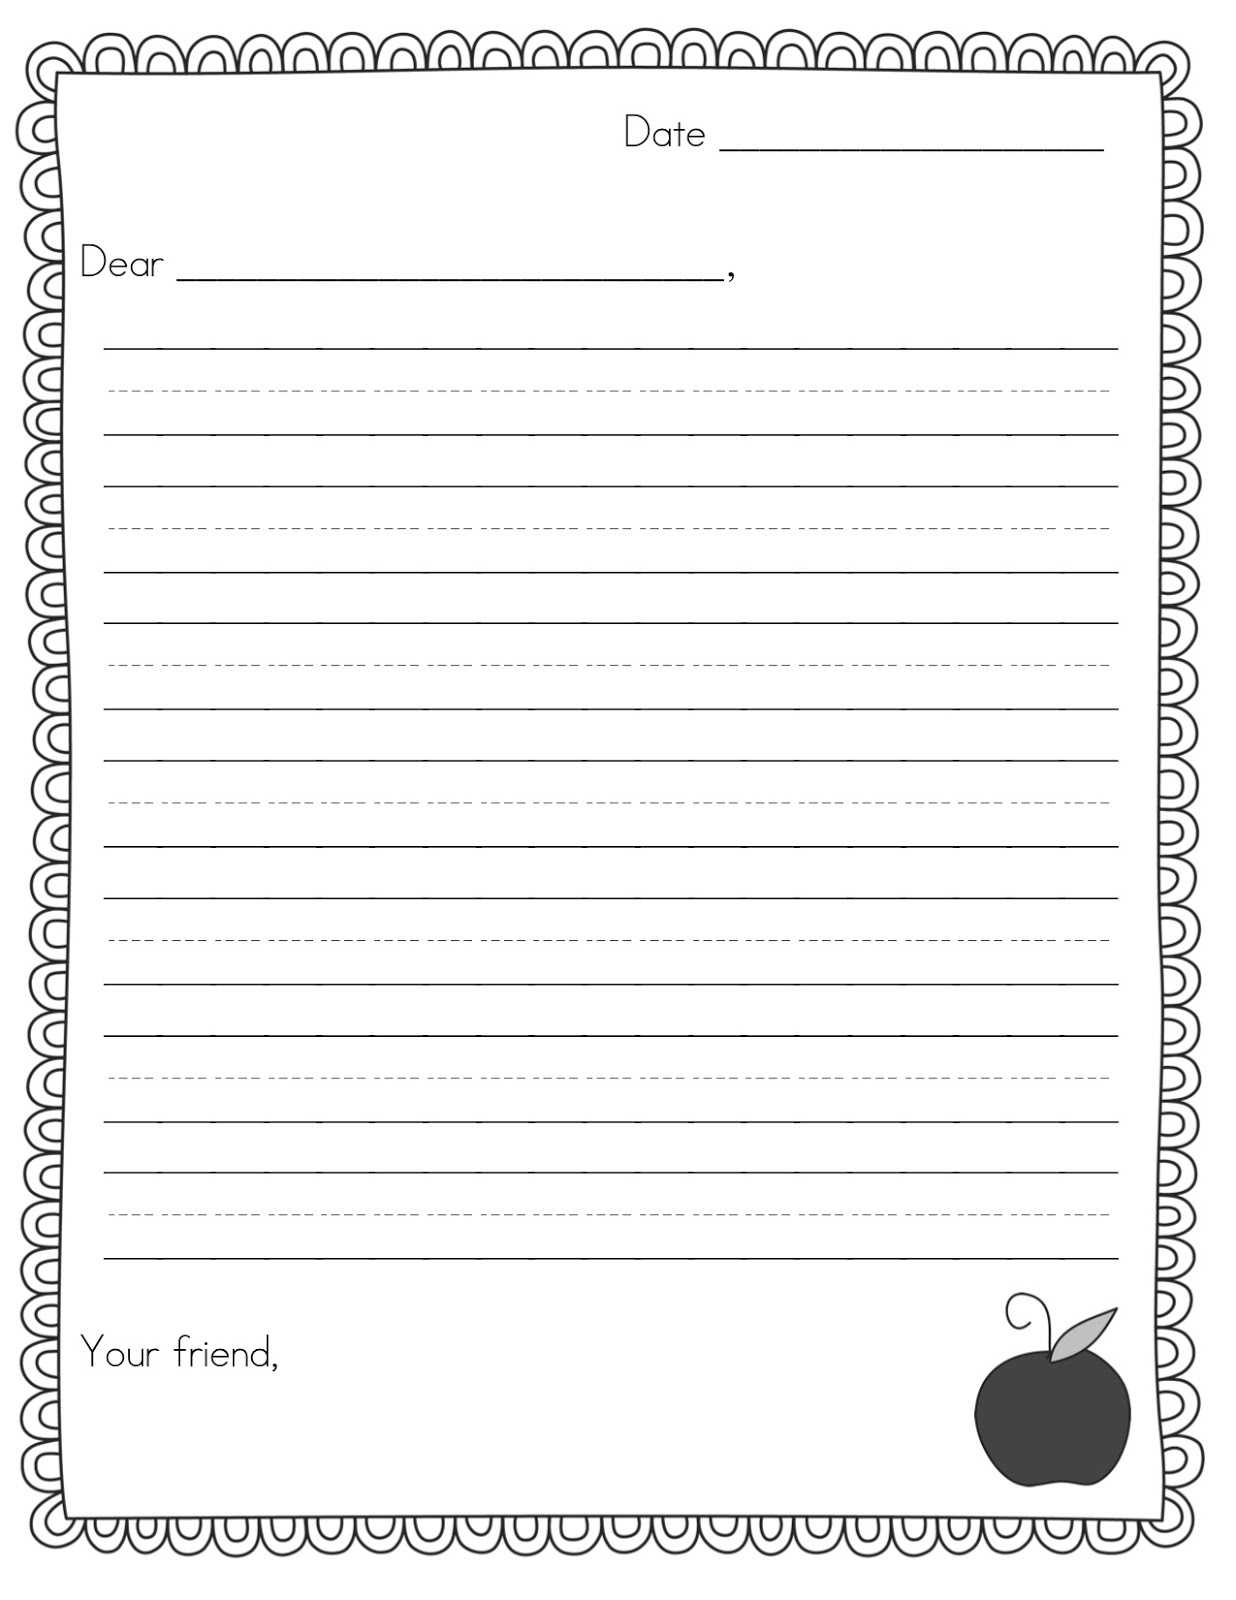 Free Letter Writing Template - Tomope.zaribanks.co Regarding Blank Letter Writing Template For Kids